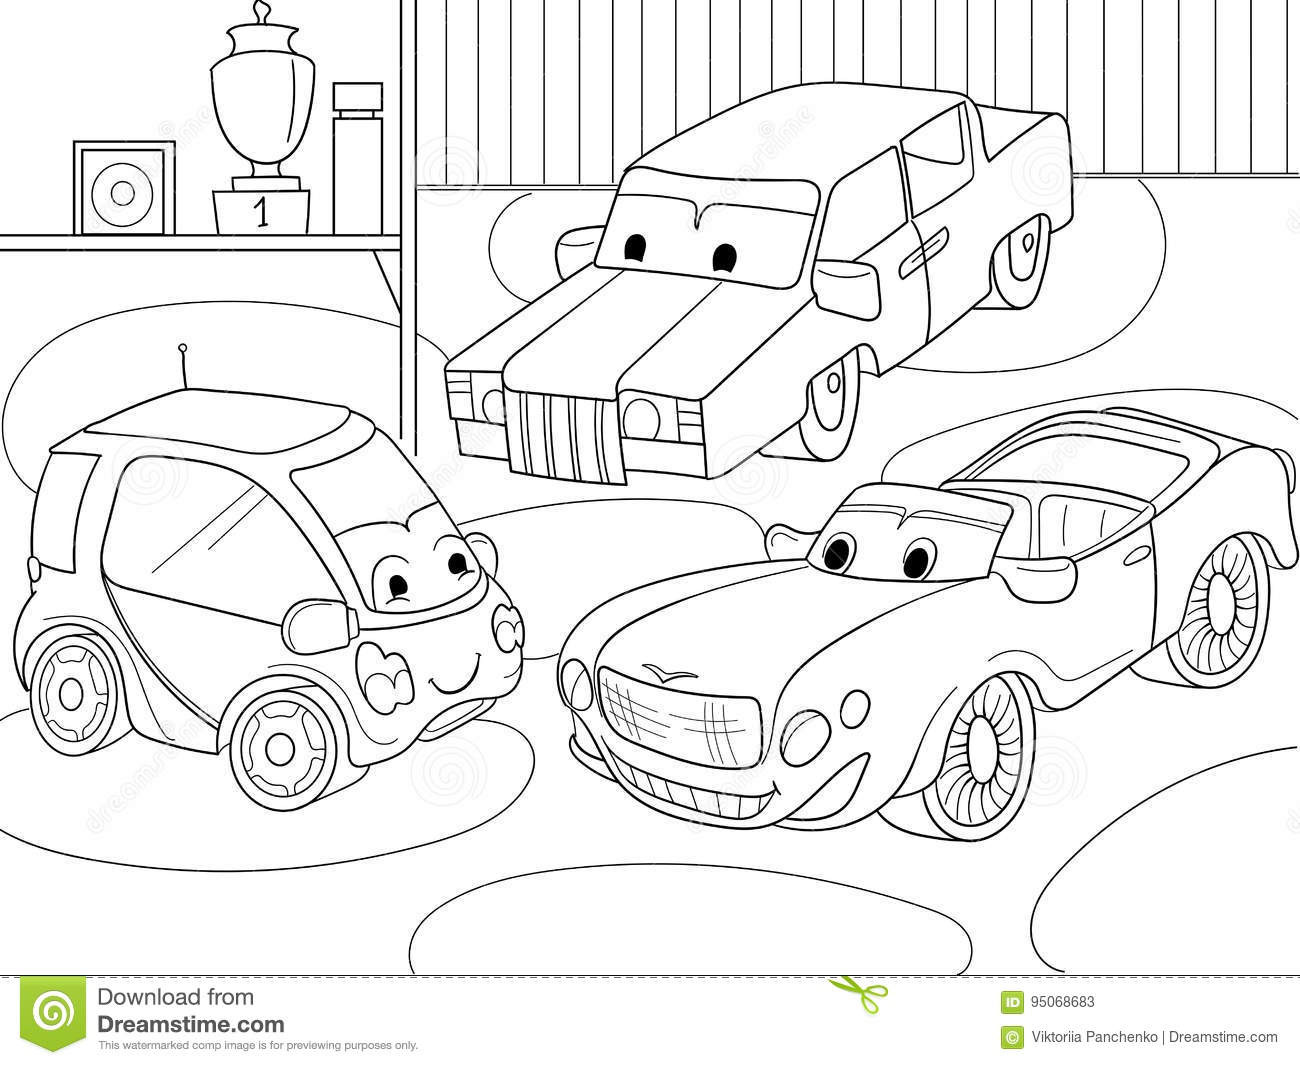 Coloring Book For Boys
 Childrens Cartoon Coloring Book For Boys Vector